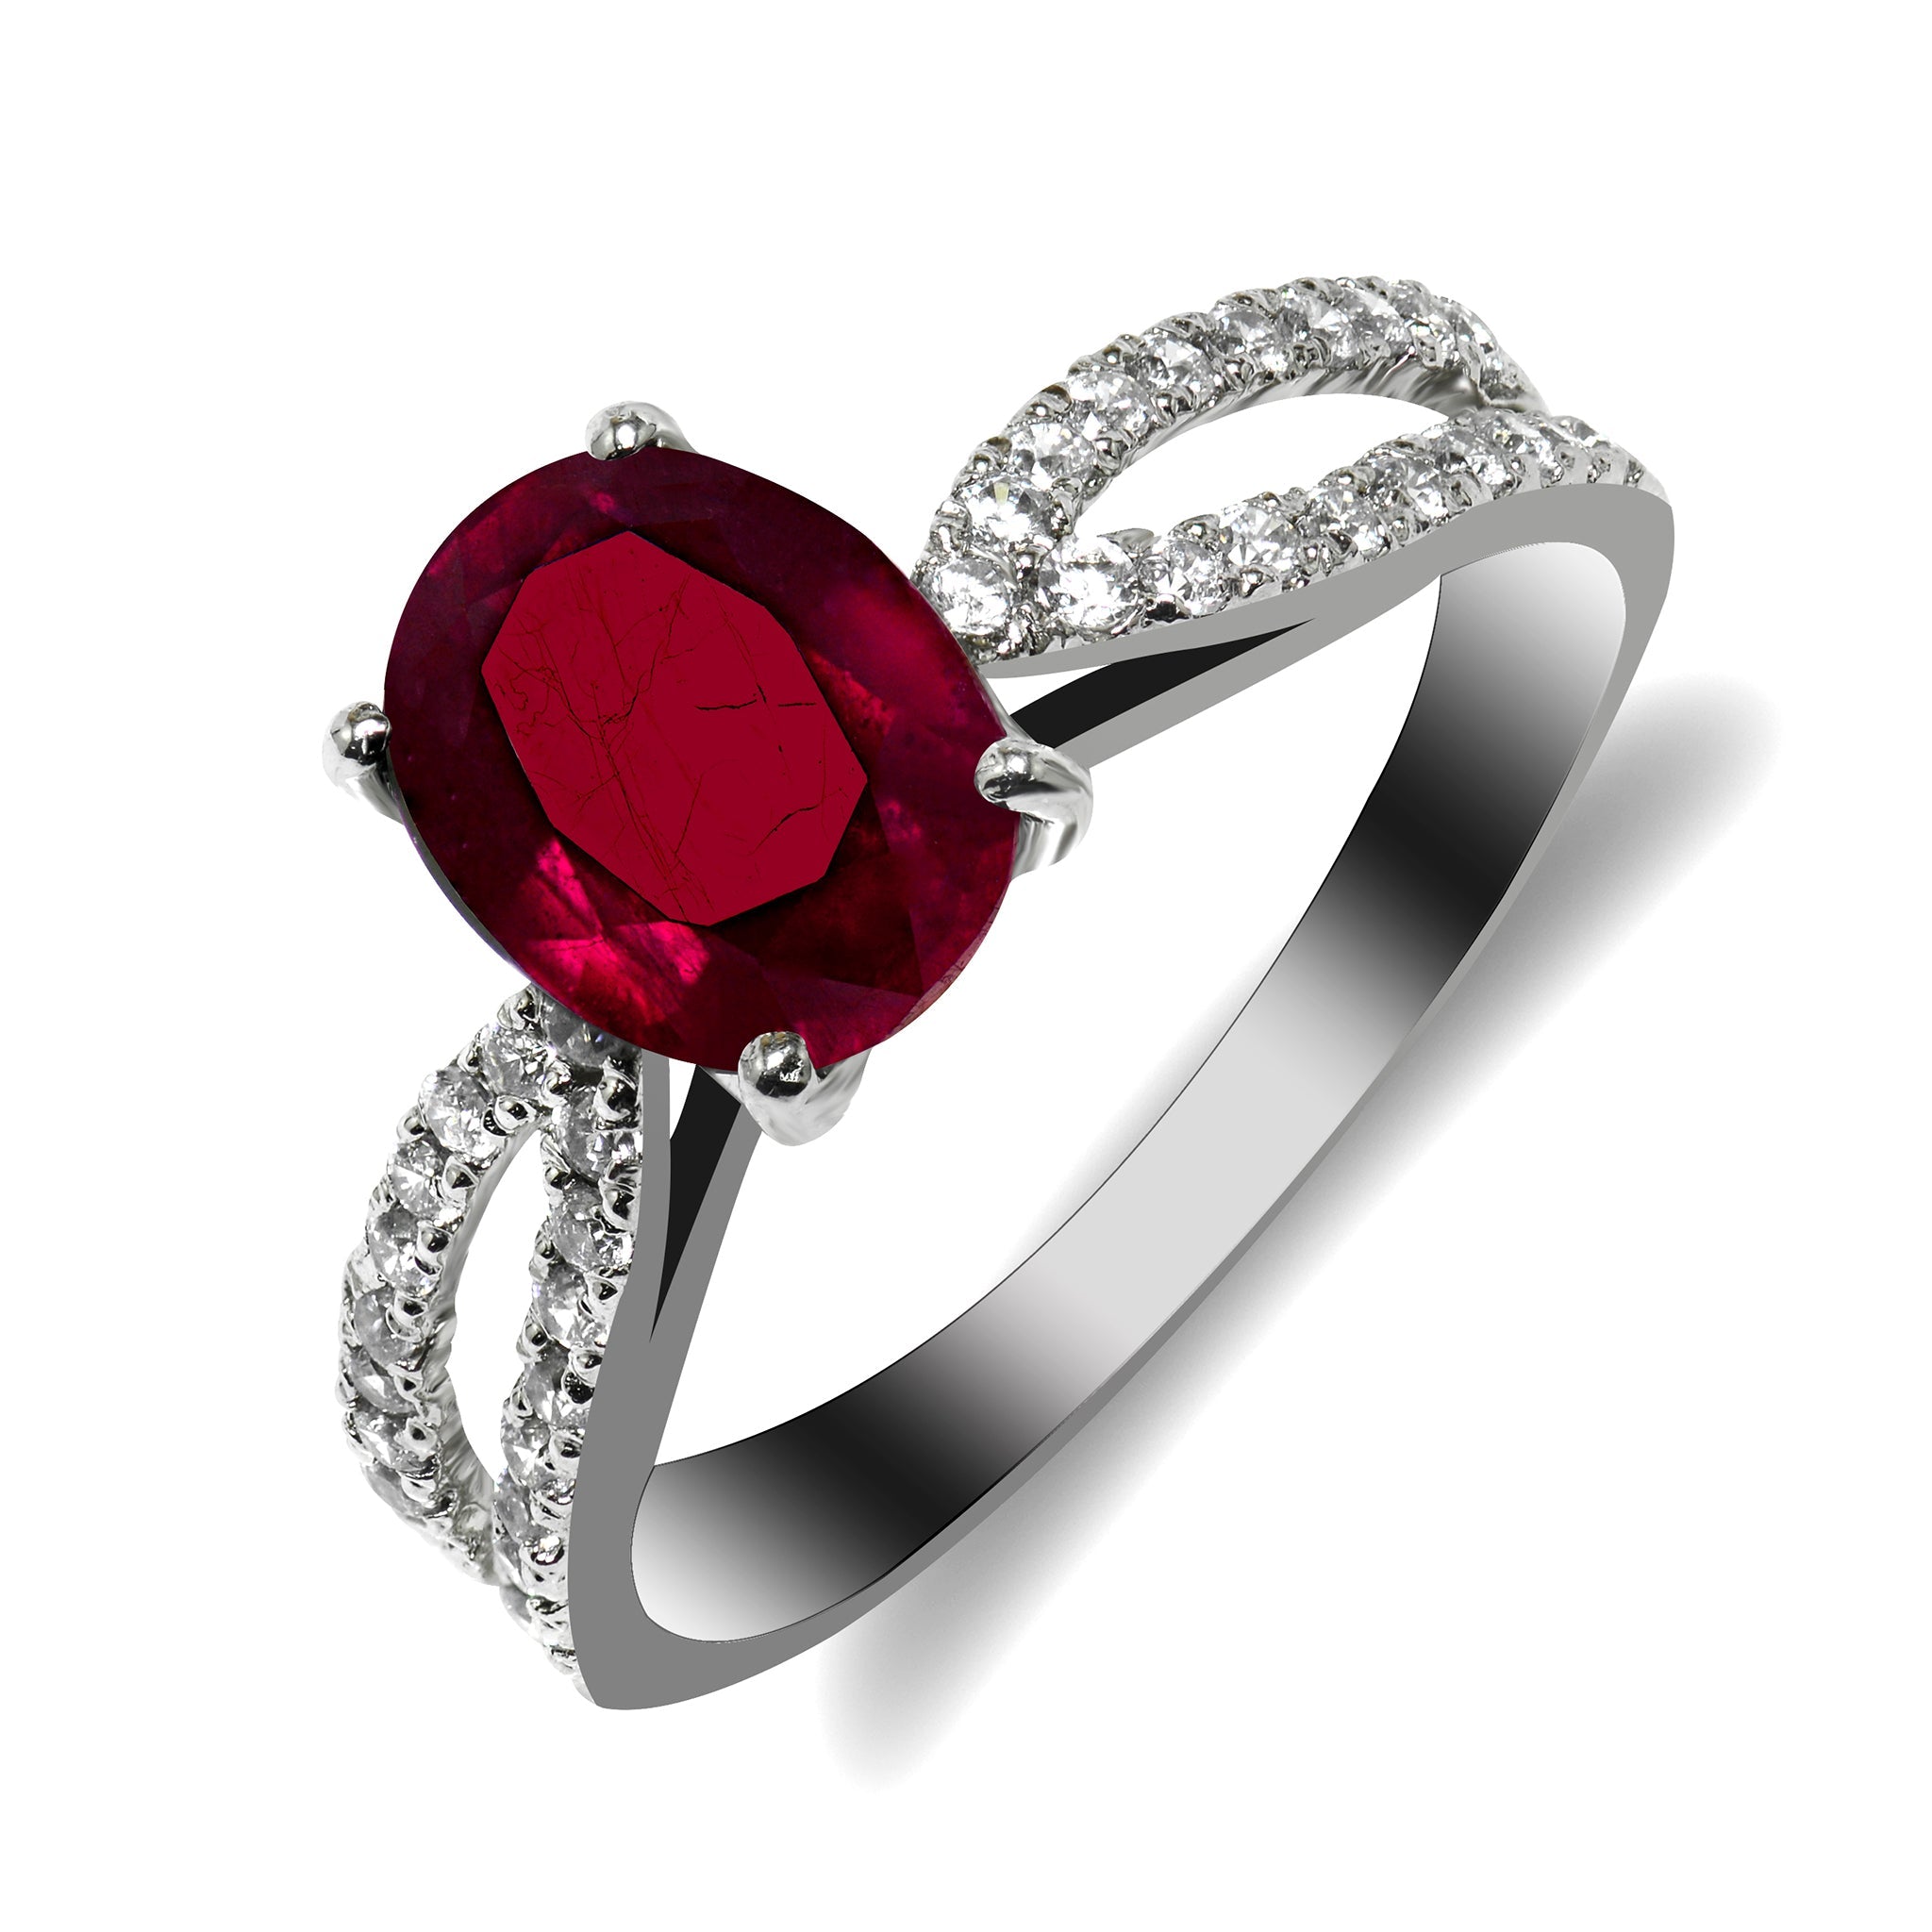 Amazon.com: Ruby Stone Men Silver Ring, 925 Sterling Silver Ruby Gemstone  Ring, Handmade Turkish Silver Ring with Natural Ruby Stone, Gift for Him  gifts for men handmade rings valentines day gifts for